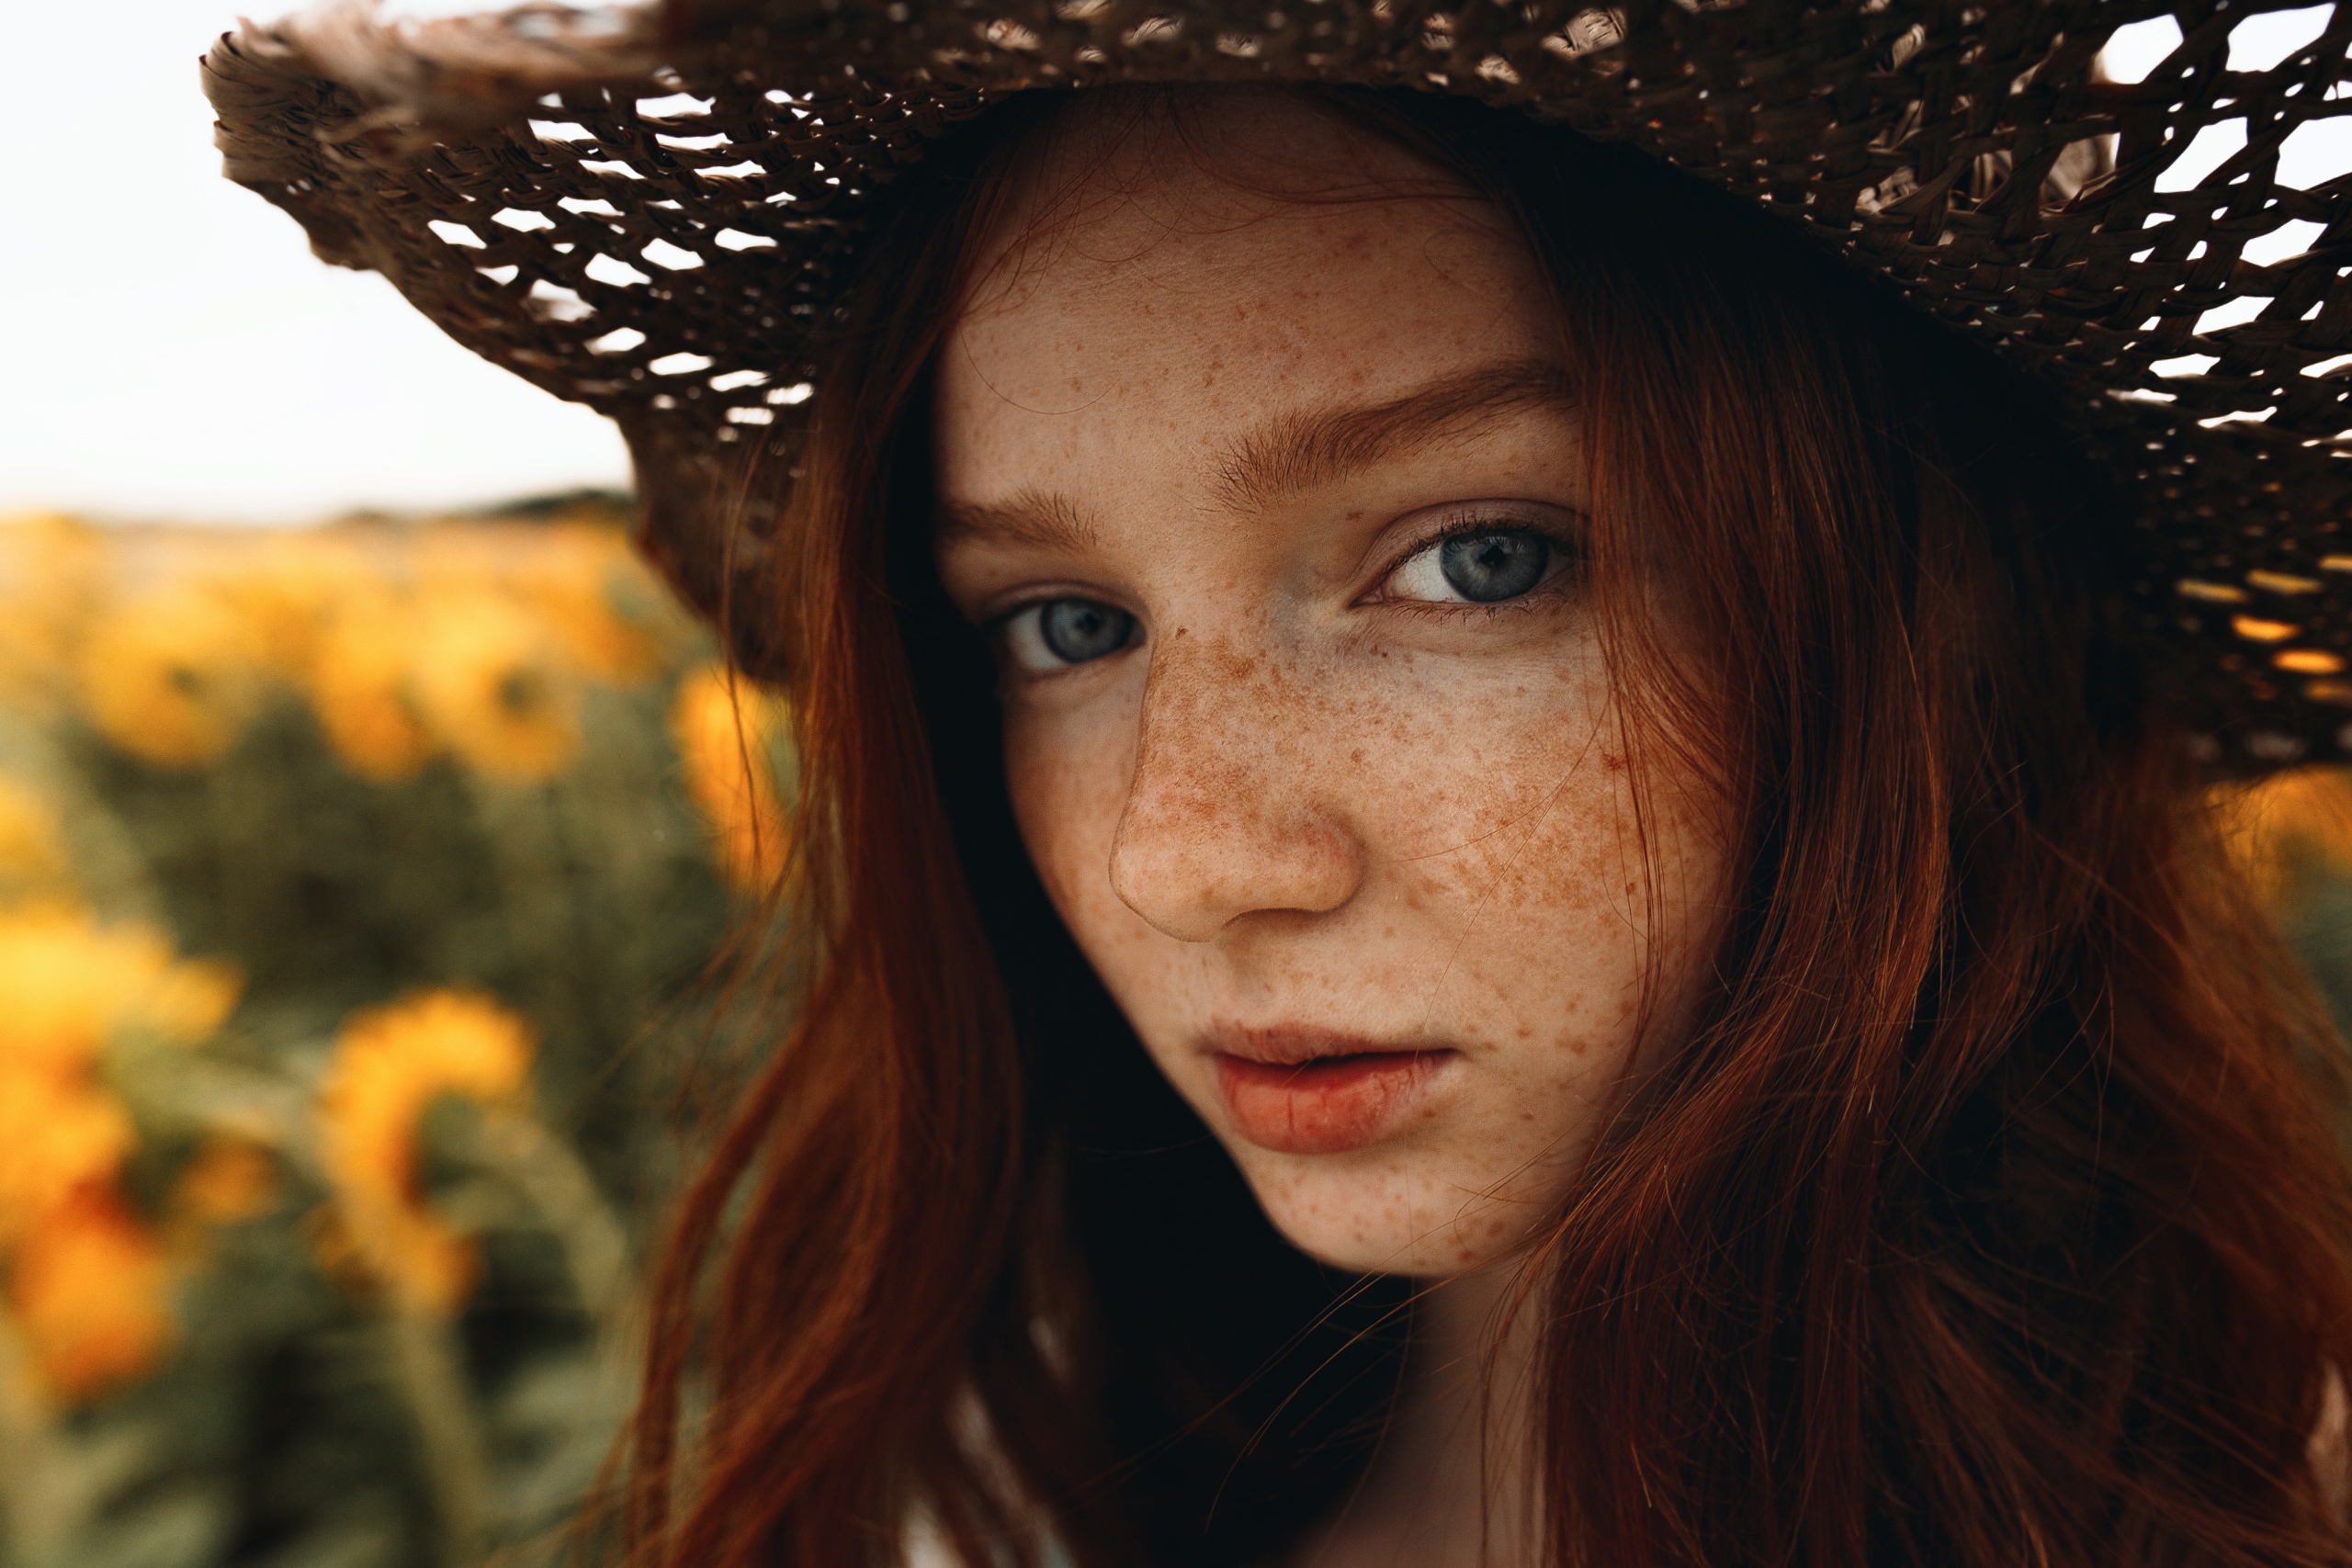 People 2560x1707 Sergey Nevzorov women redhead model looking at viewer face portrait freckles women with hats straw hat women outdoors yellow flowers closeup